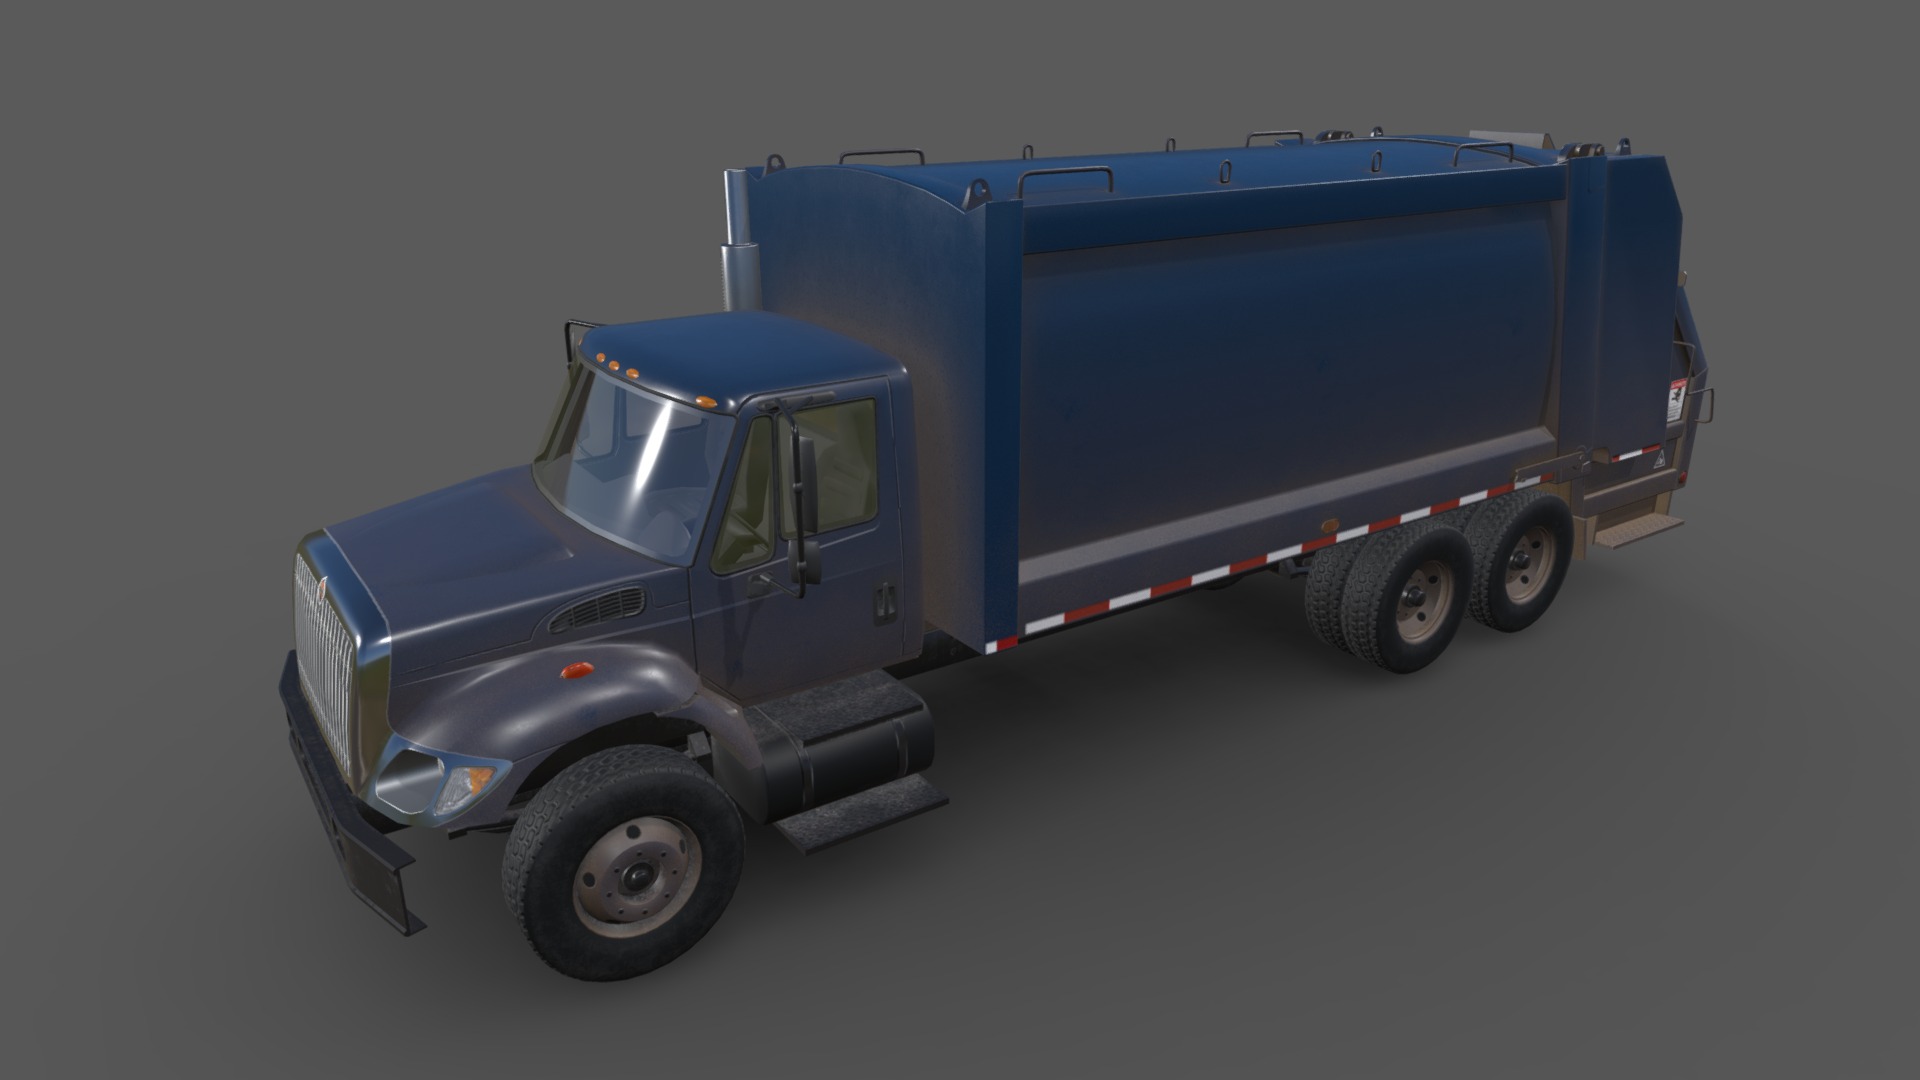 3D model International 7400 Garbage Truck - This is a 3D model of the International 7400 Garbage Truck. The 3D model is about a blue trailer with a trailer.